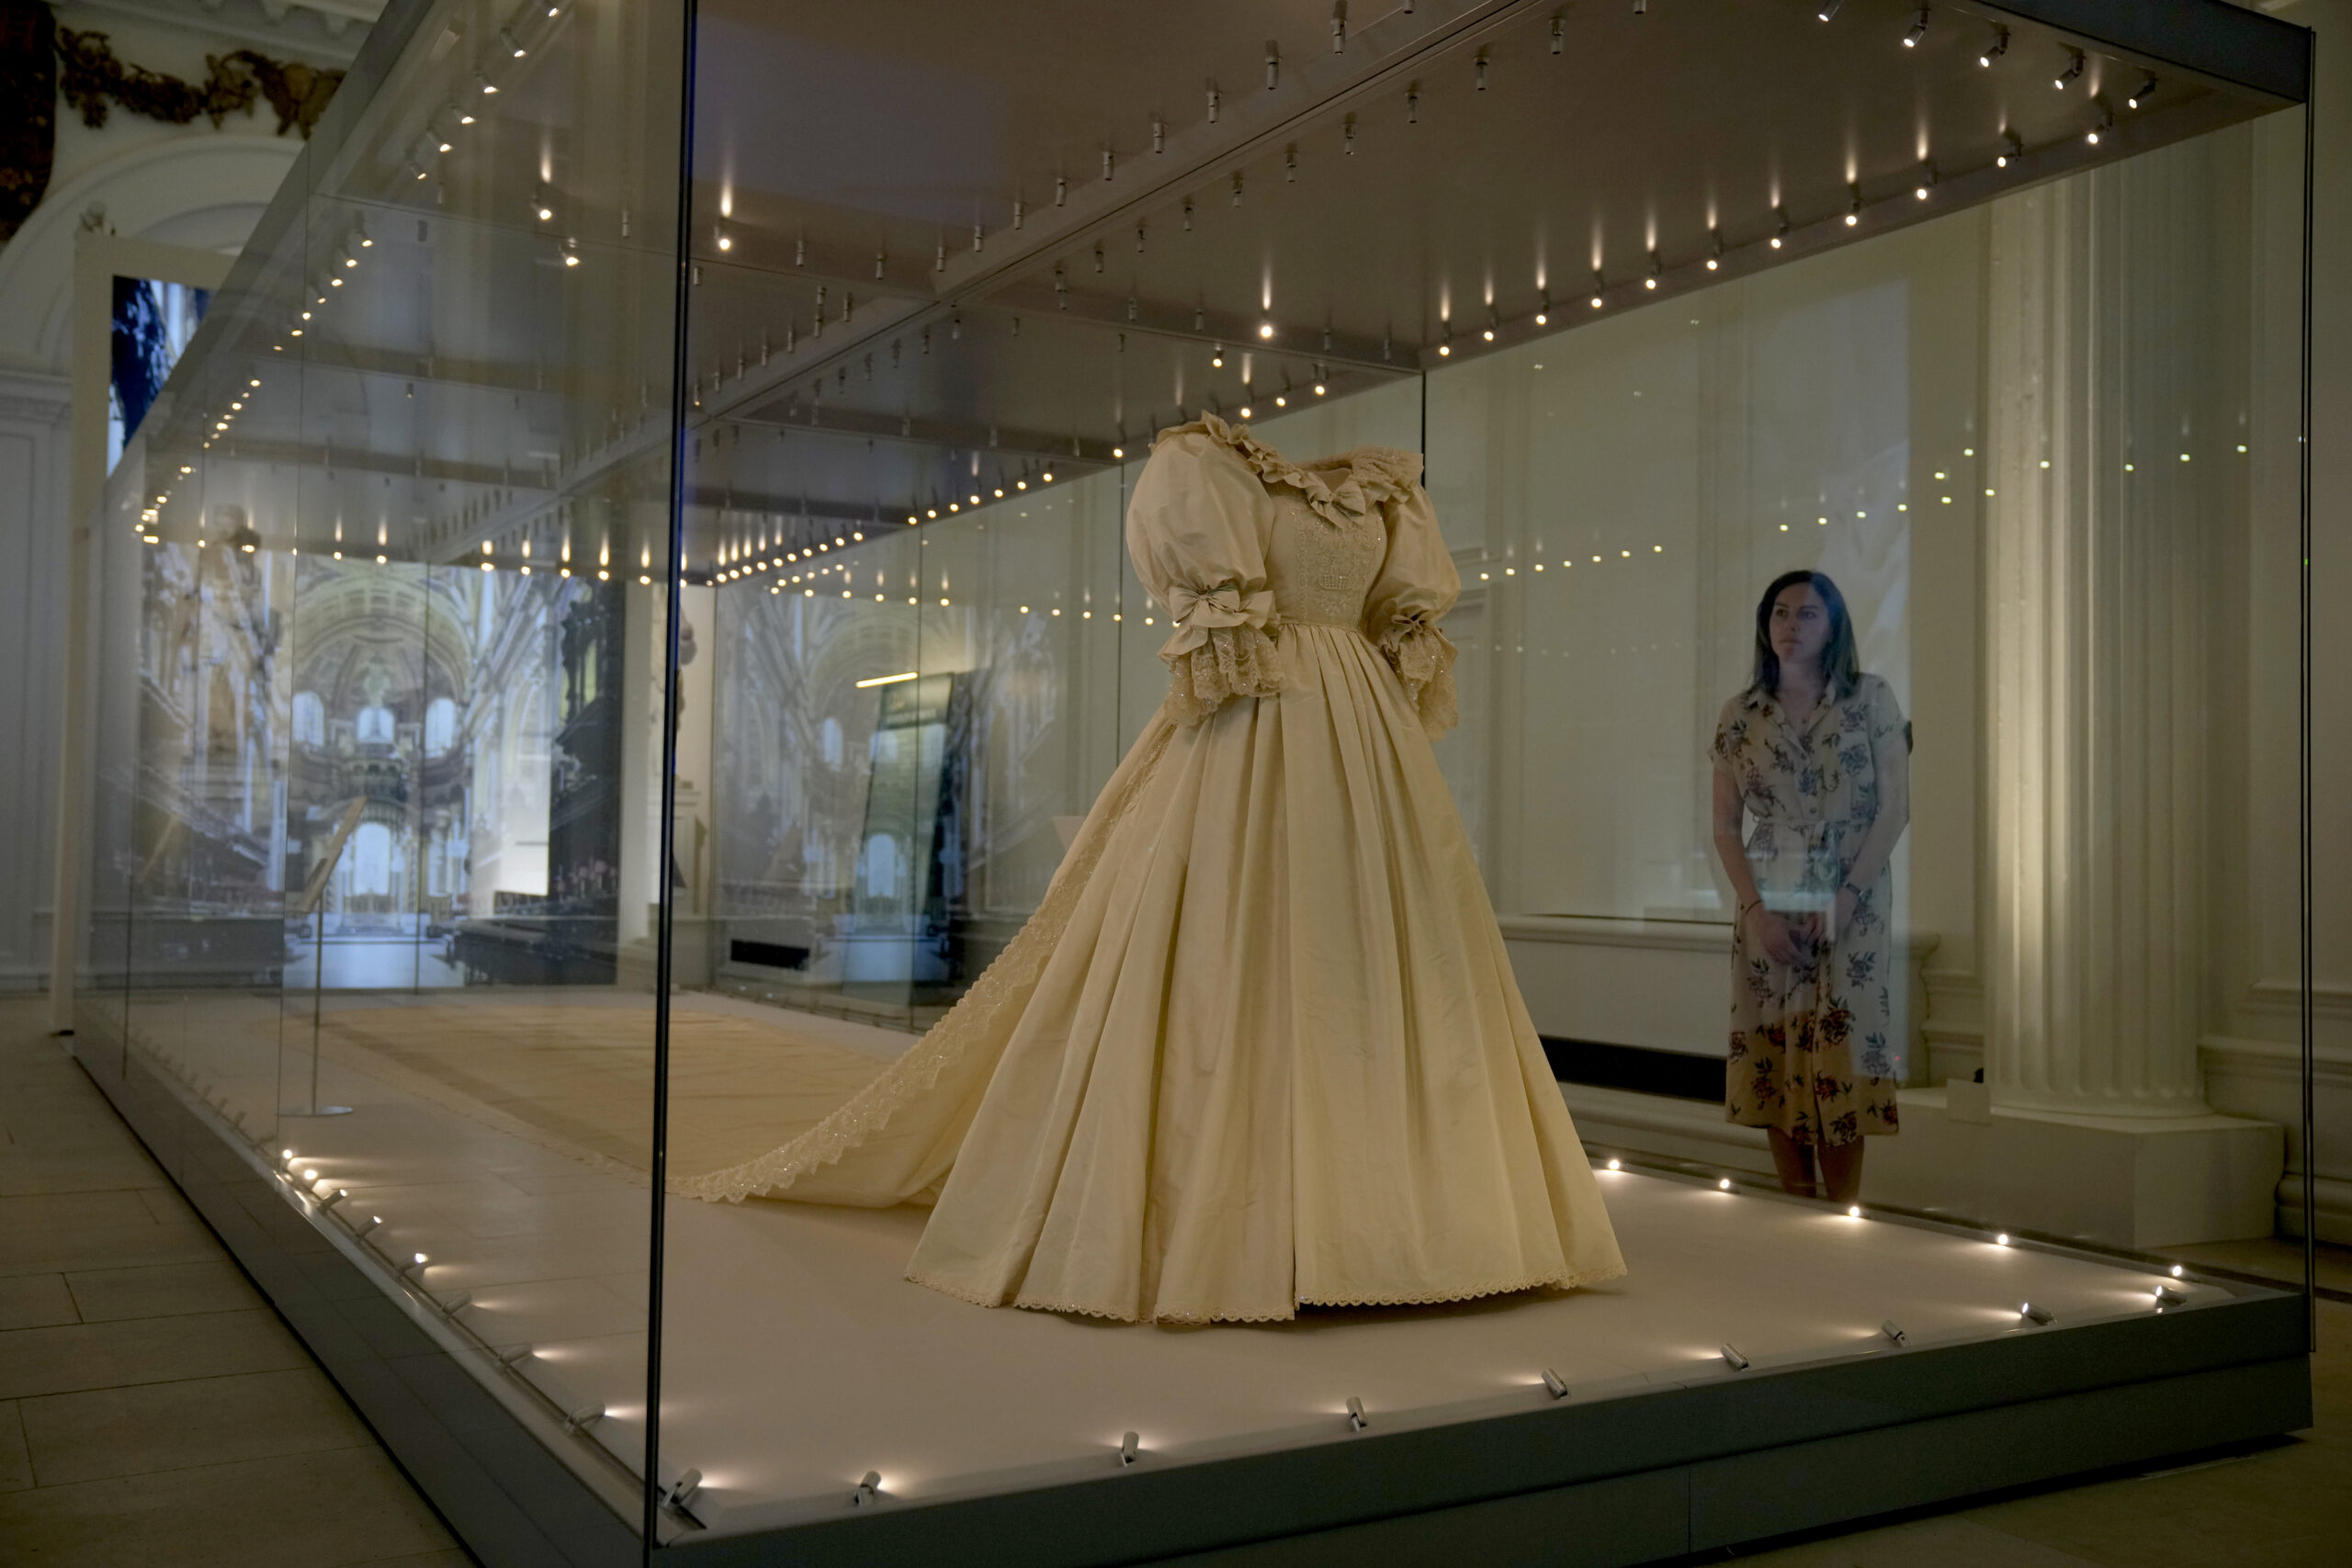 A staff member poses for photographers next to the wedding dress of Britain's Princess Diana during a media preview for the "Royal Style in the Making" exhibition at Kensington Palace in London, Wednesday June 2, 2021. The exhibition, which opens to visitors on Thursday and runs until January 2, 2022, explores the intimate relationship between fashion designer and royal client. (AP Photo/Matt Dunham)